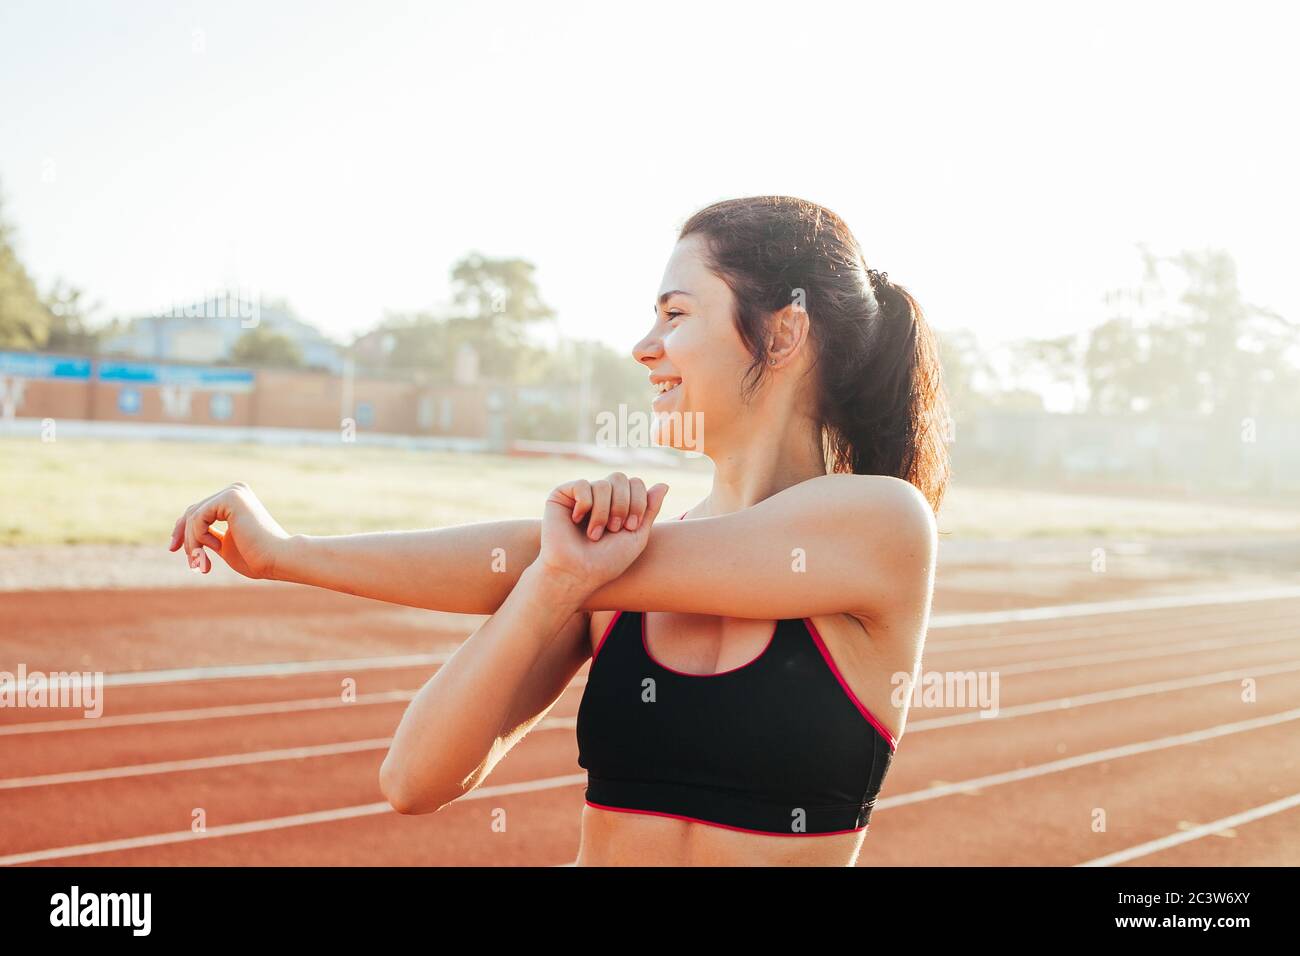 Athletic woman stretching on running track before training, healthy fitness lifesty Stock Photo